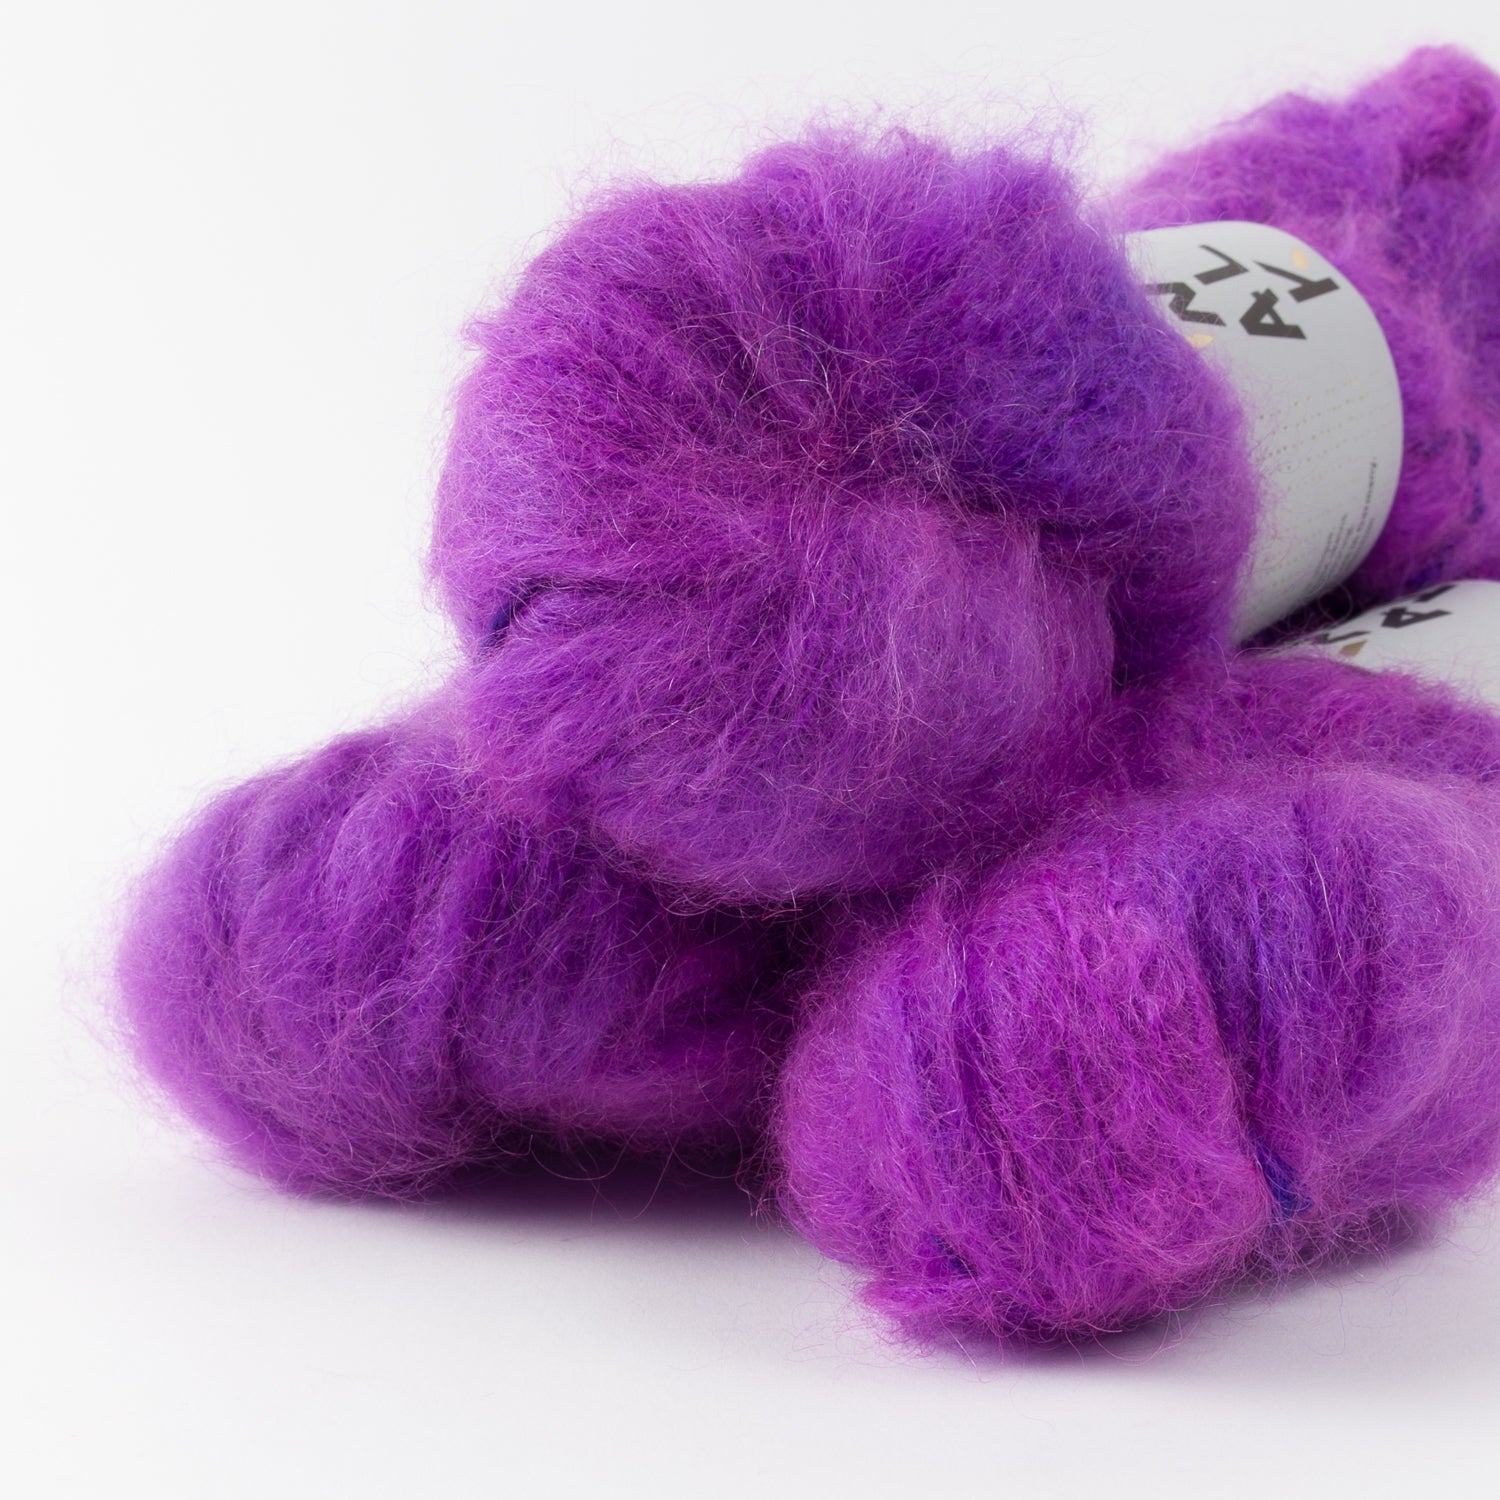 BIG KID MOHAIR - WILD ORCHID